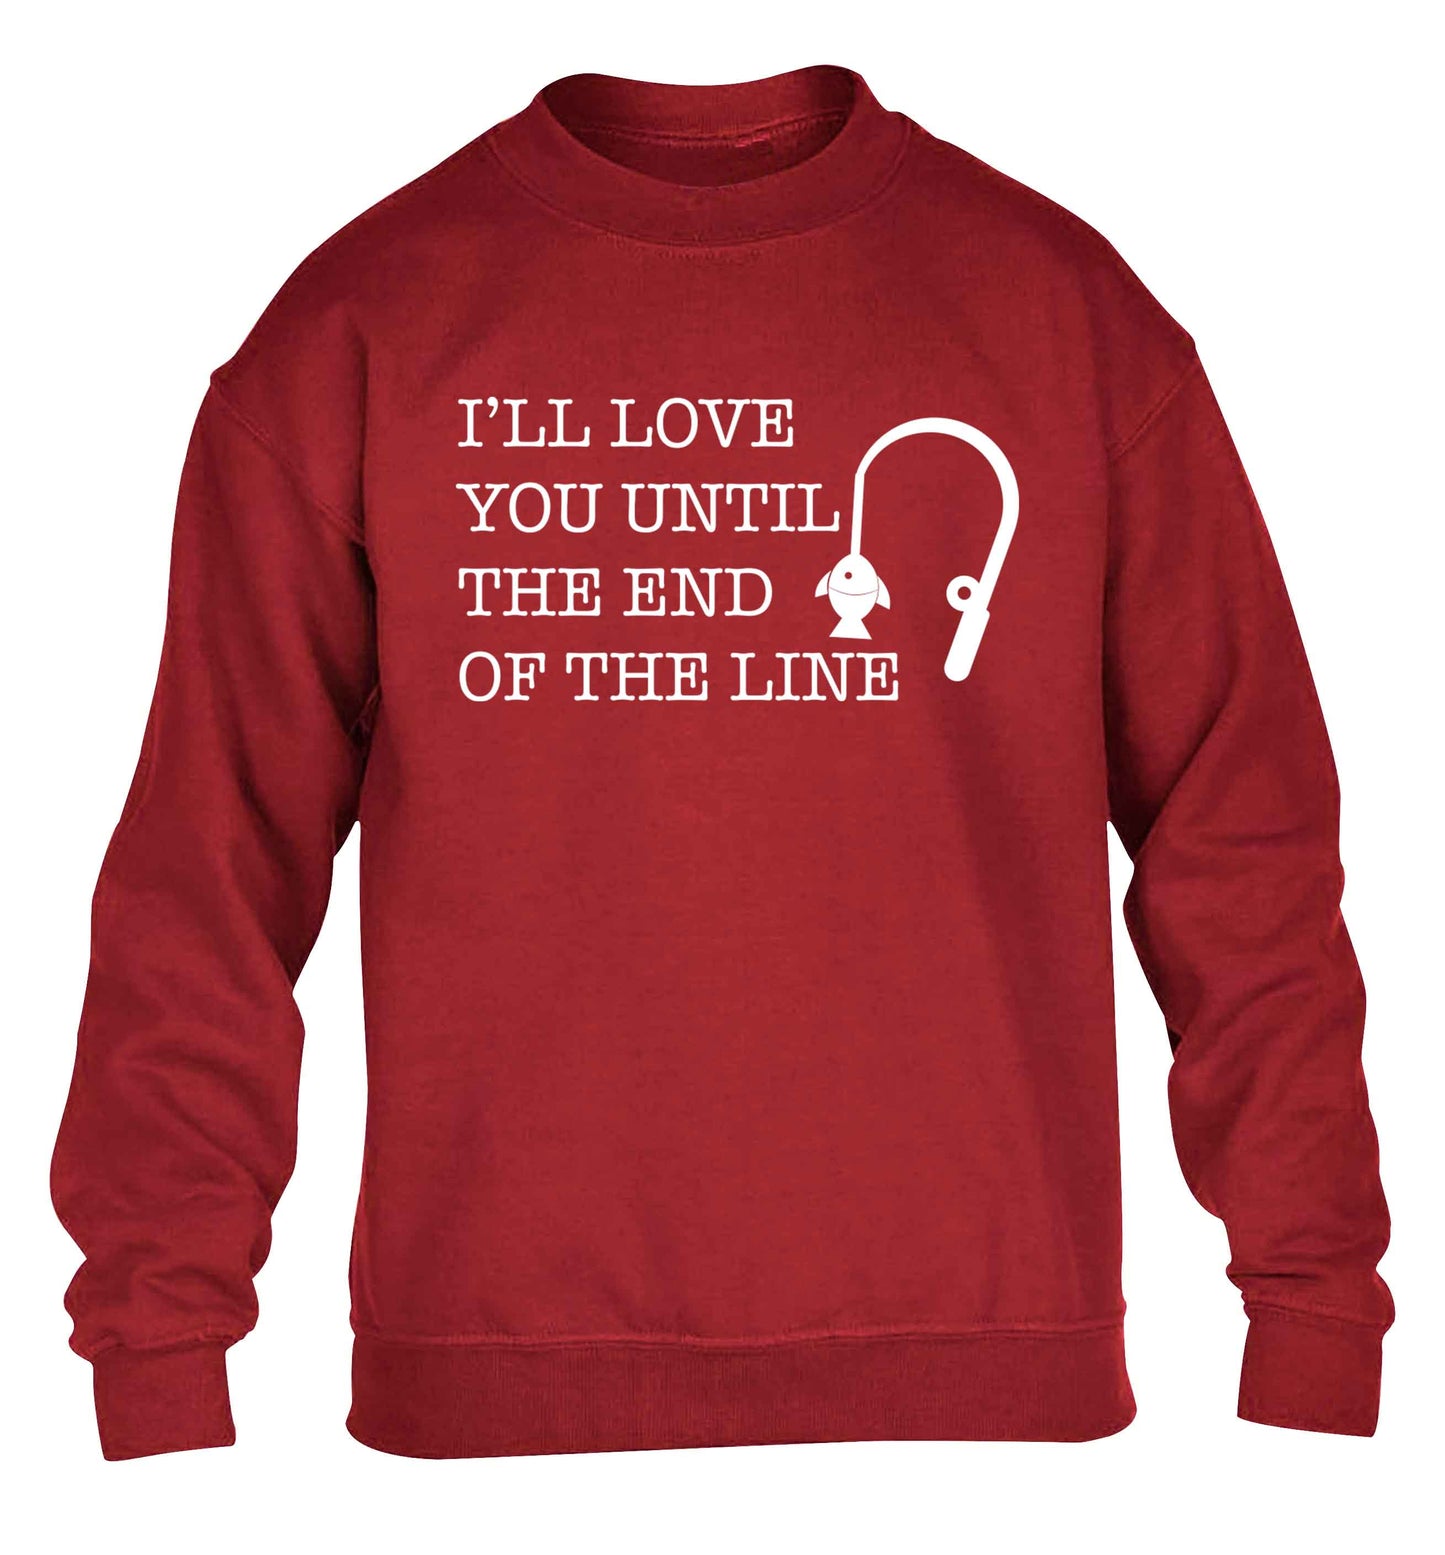 I'll love you until the end of the line children's grey sweater 12-13 Years